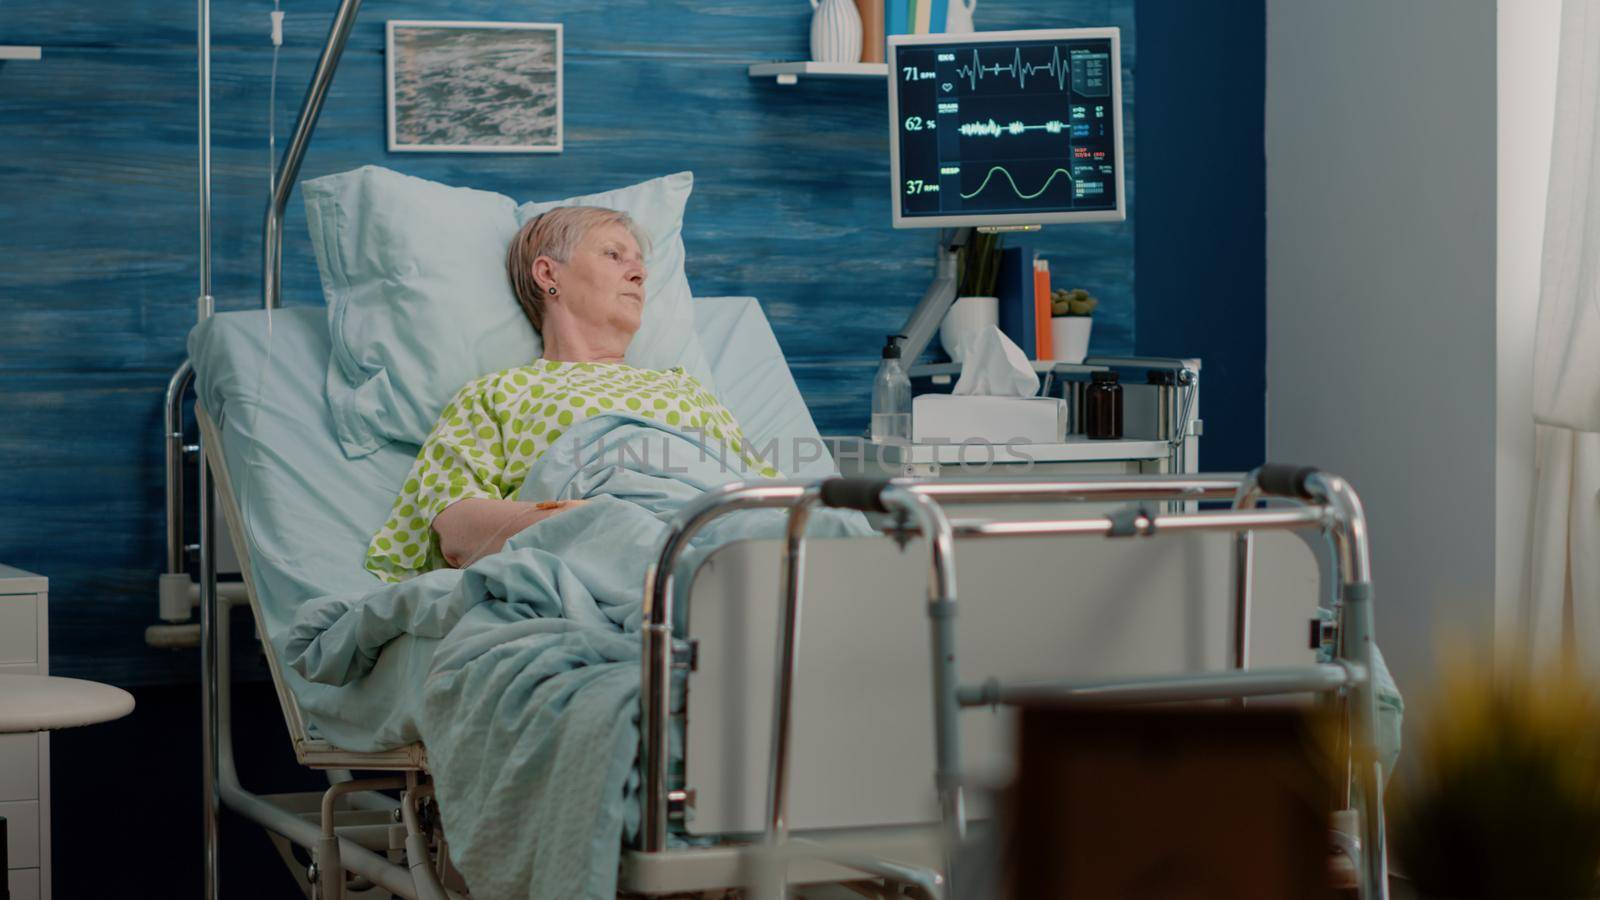 Elder patient with sickness laying in hospital bed with heart rate monitor and IV drip bag for medical assistance and treatment, recovering after surgery. Retired woman resting in nursing home.